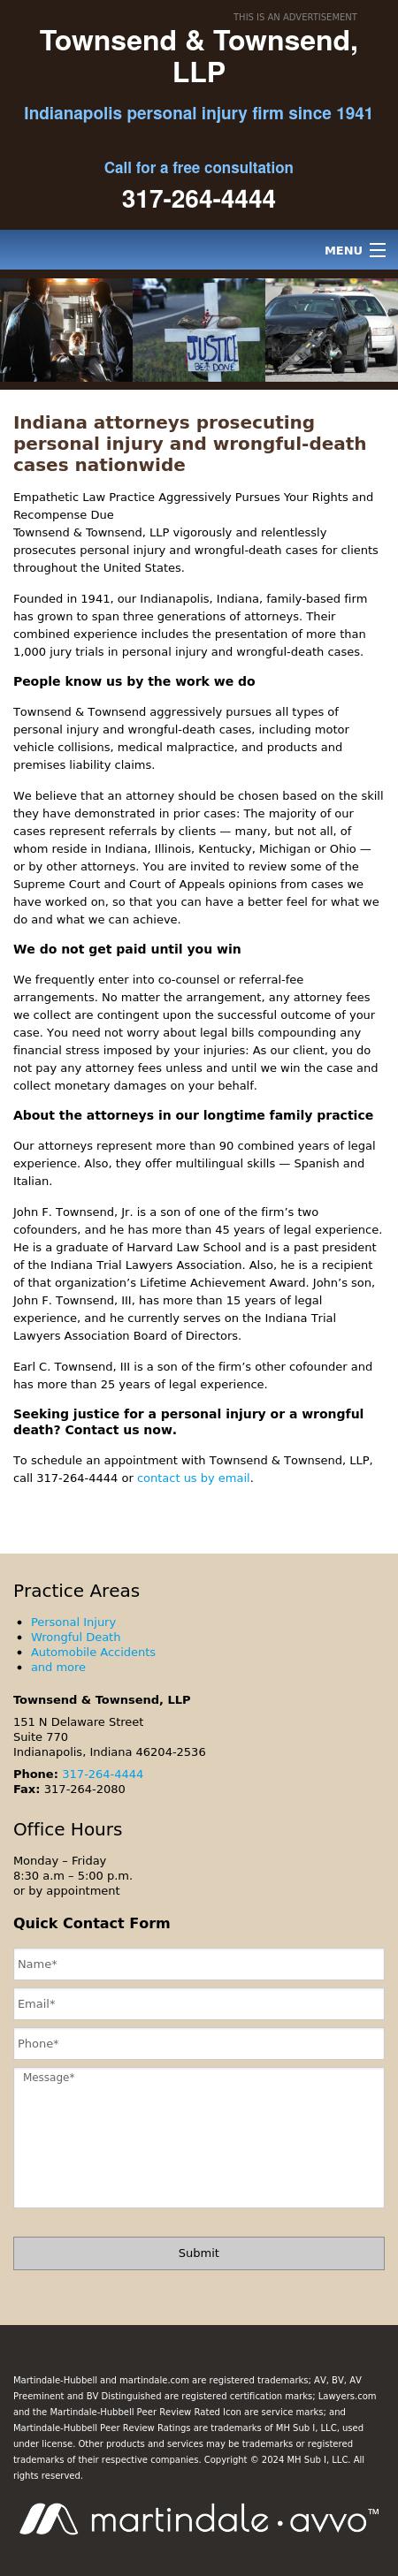 Townsend & Townsend LLP - Indianapolis IN Lawyers